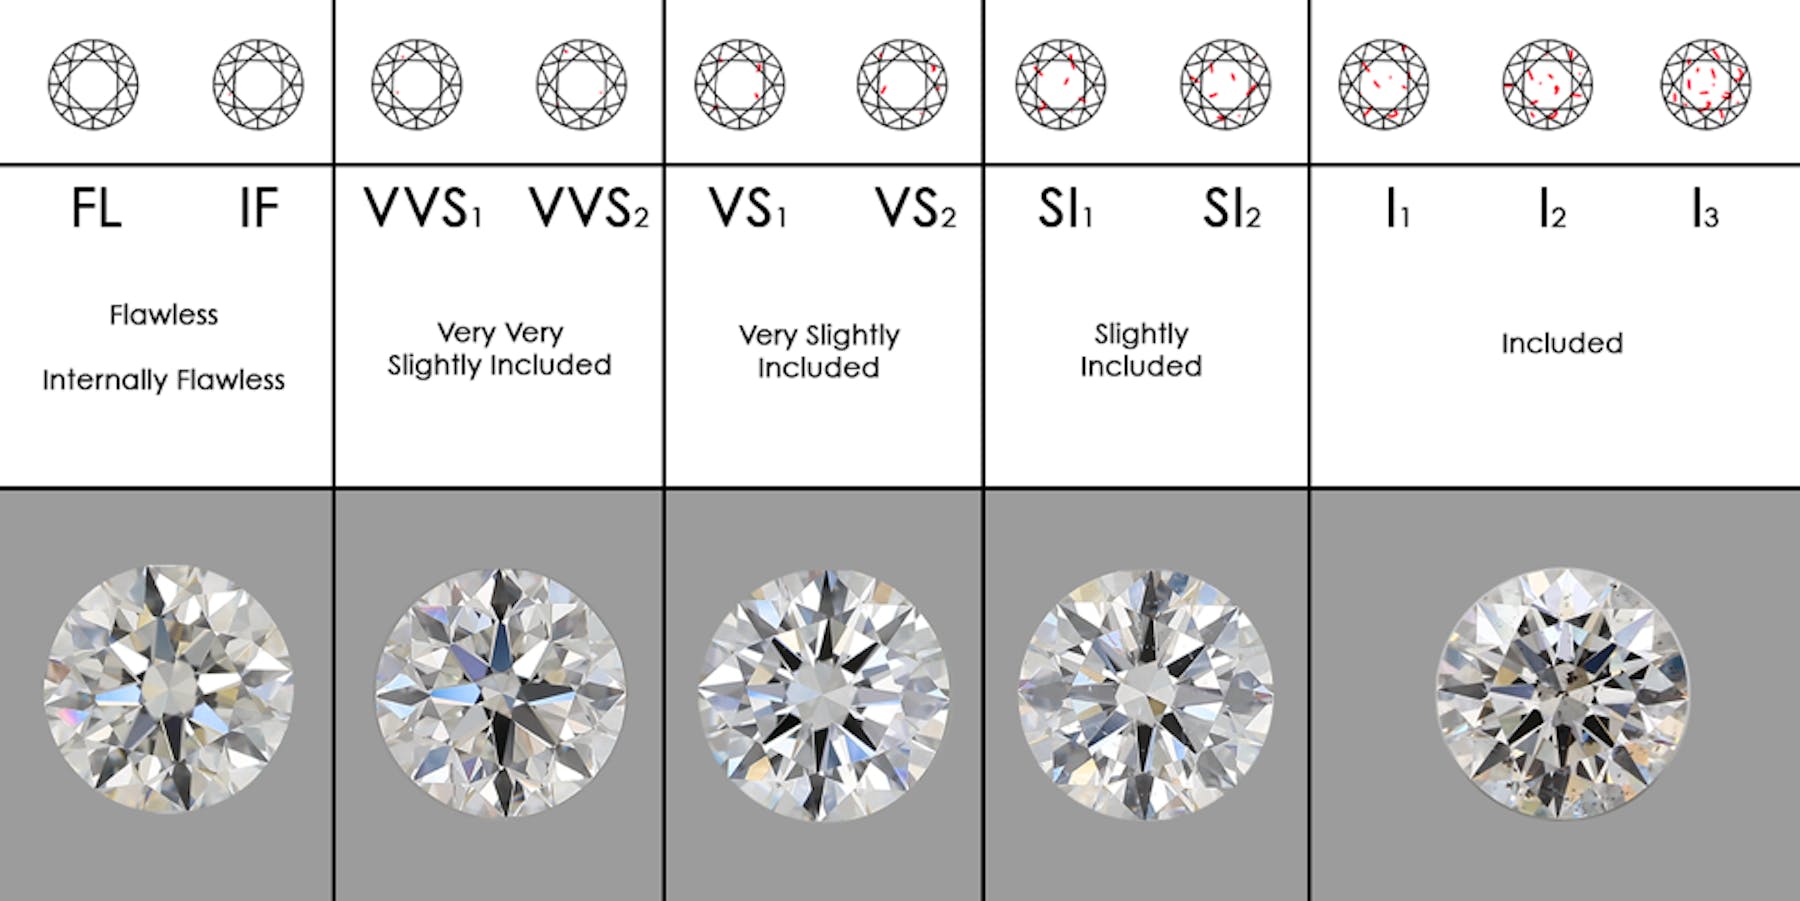 My Diamond Ring Diamond Guide Image how to find the right engagement ring diamond 4c diamond clarity Learn about the importance of having a GIA certificate